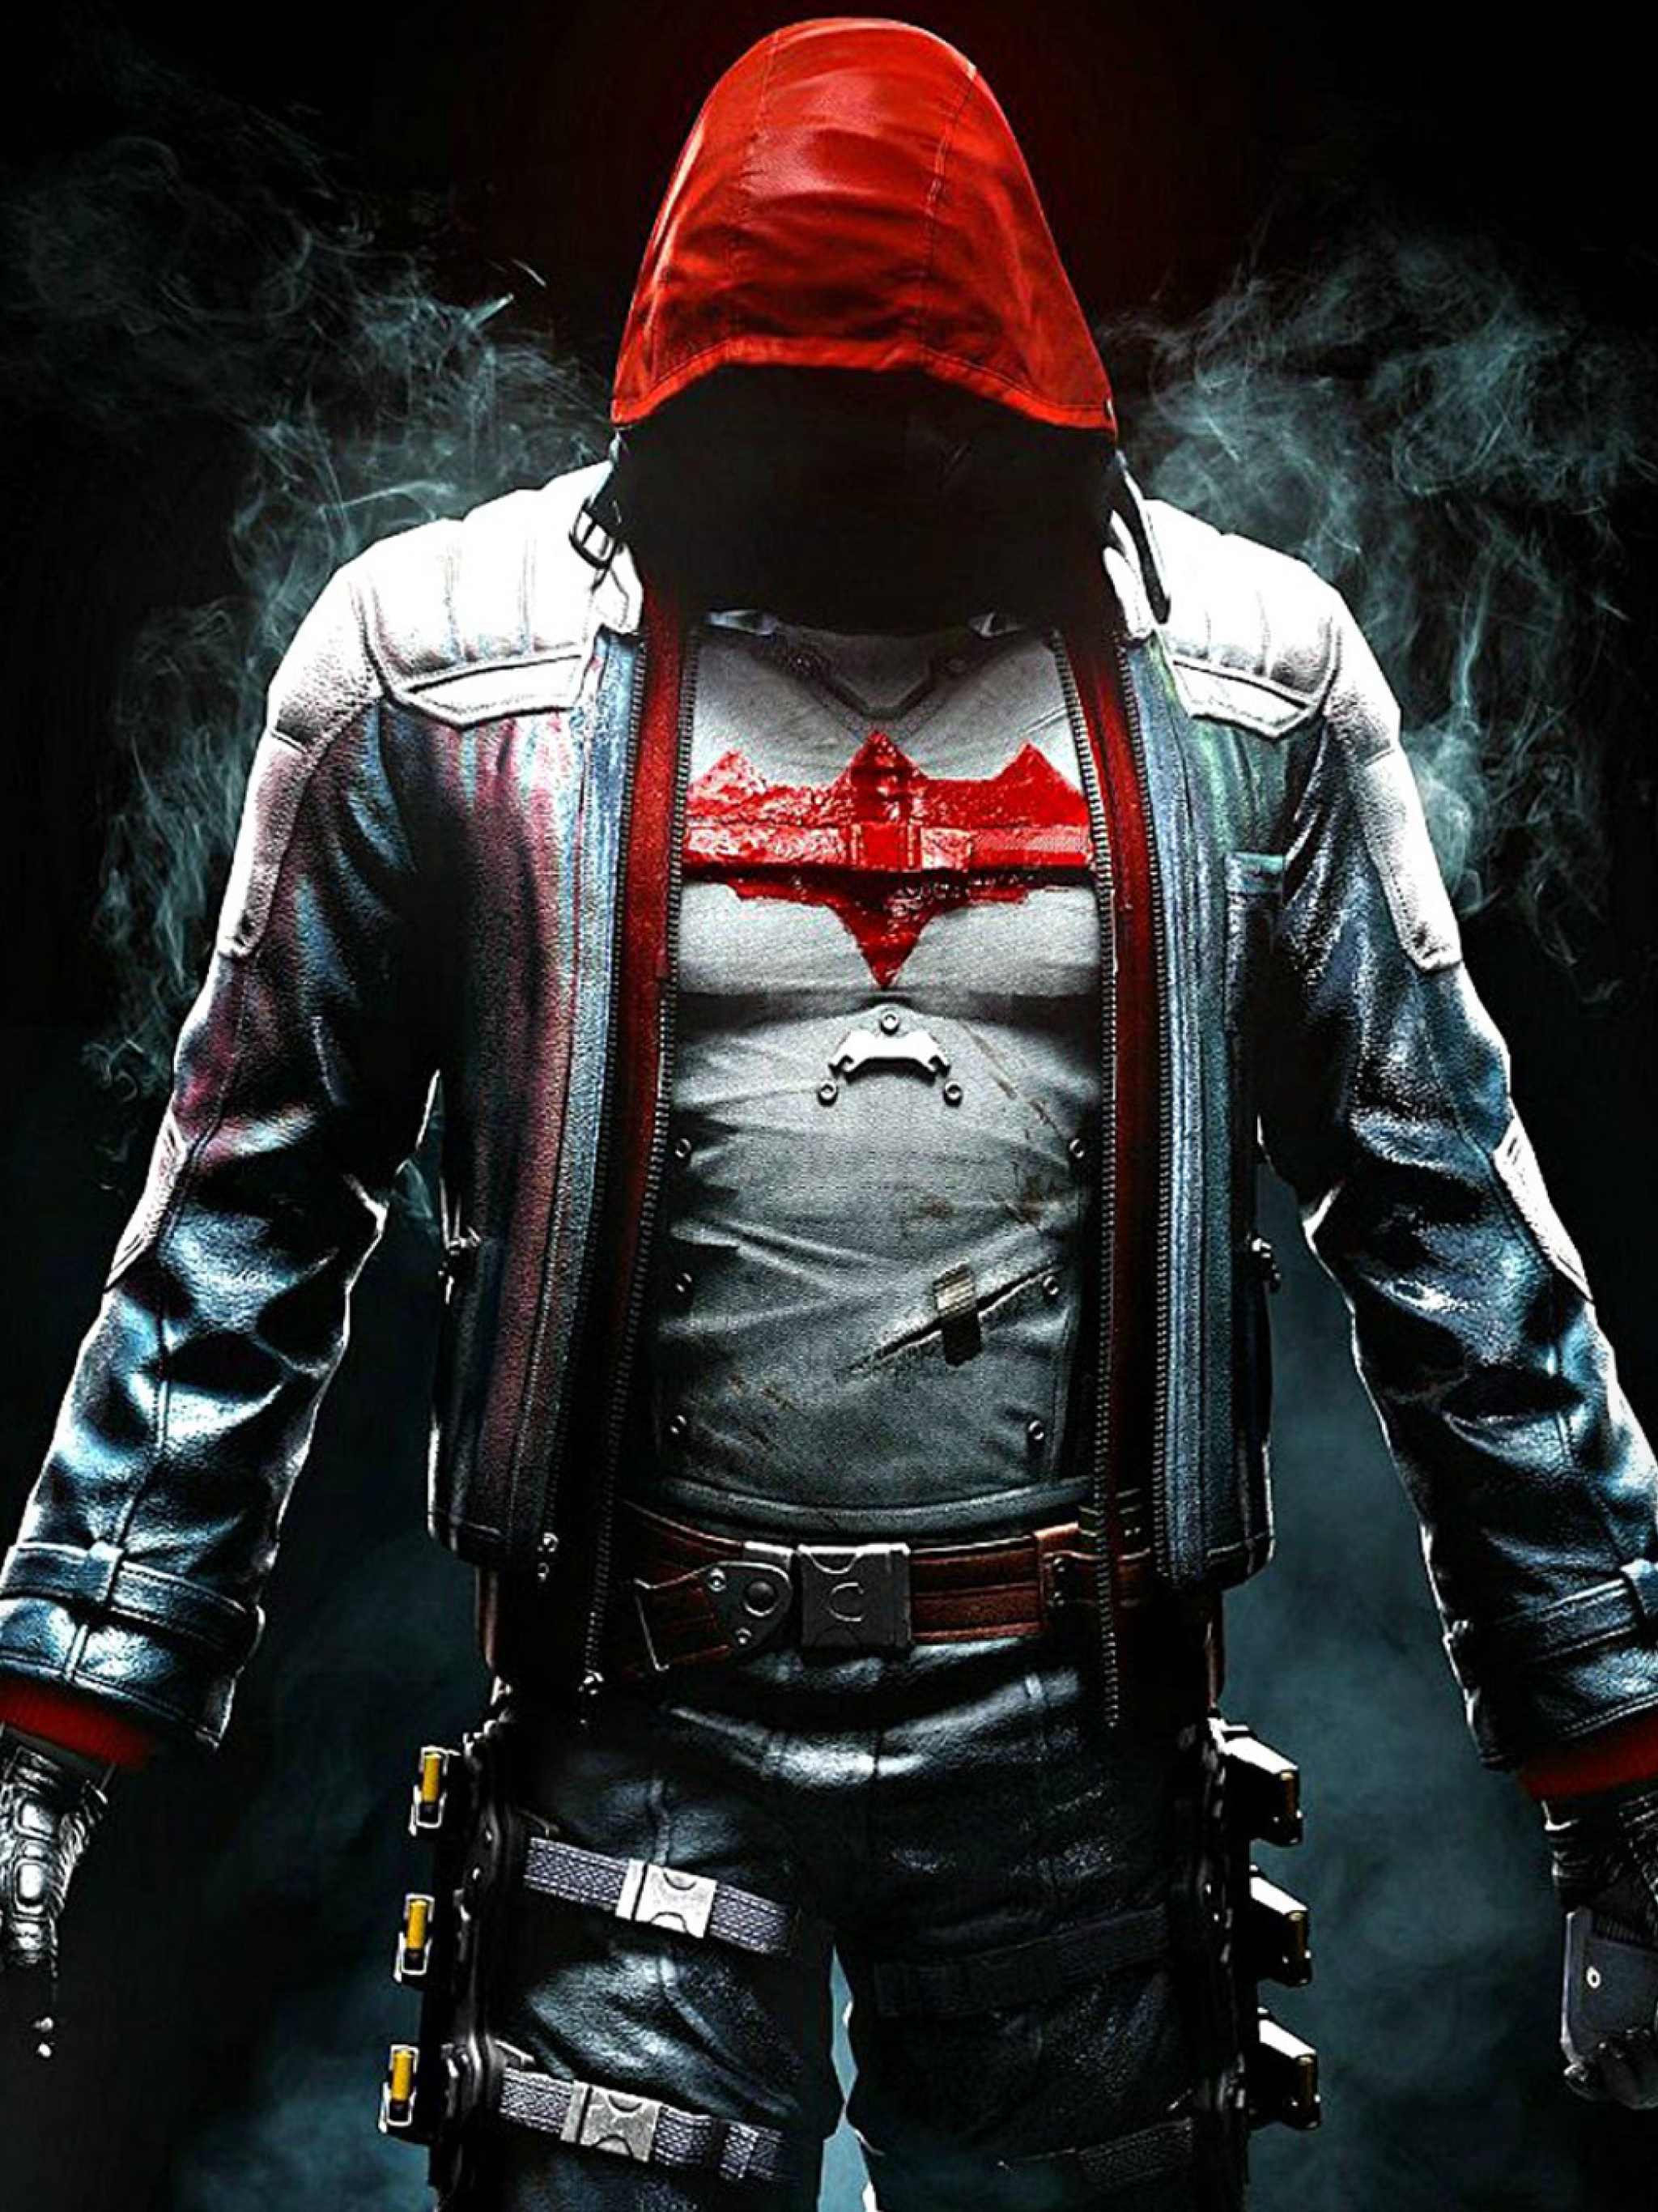 48x2732 Batman Arkham Knight Red Hood 48x2732 Resolution Wallpaper Hd Games 4k Wallpapers Images Photos And Background Wallpapers Den